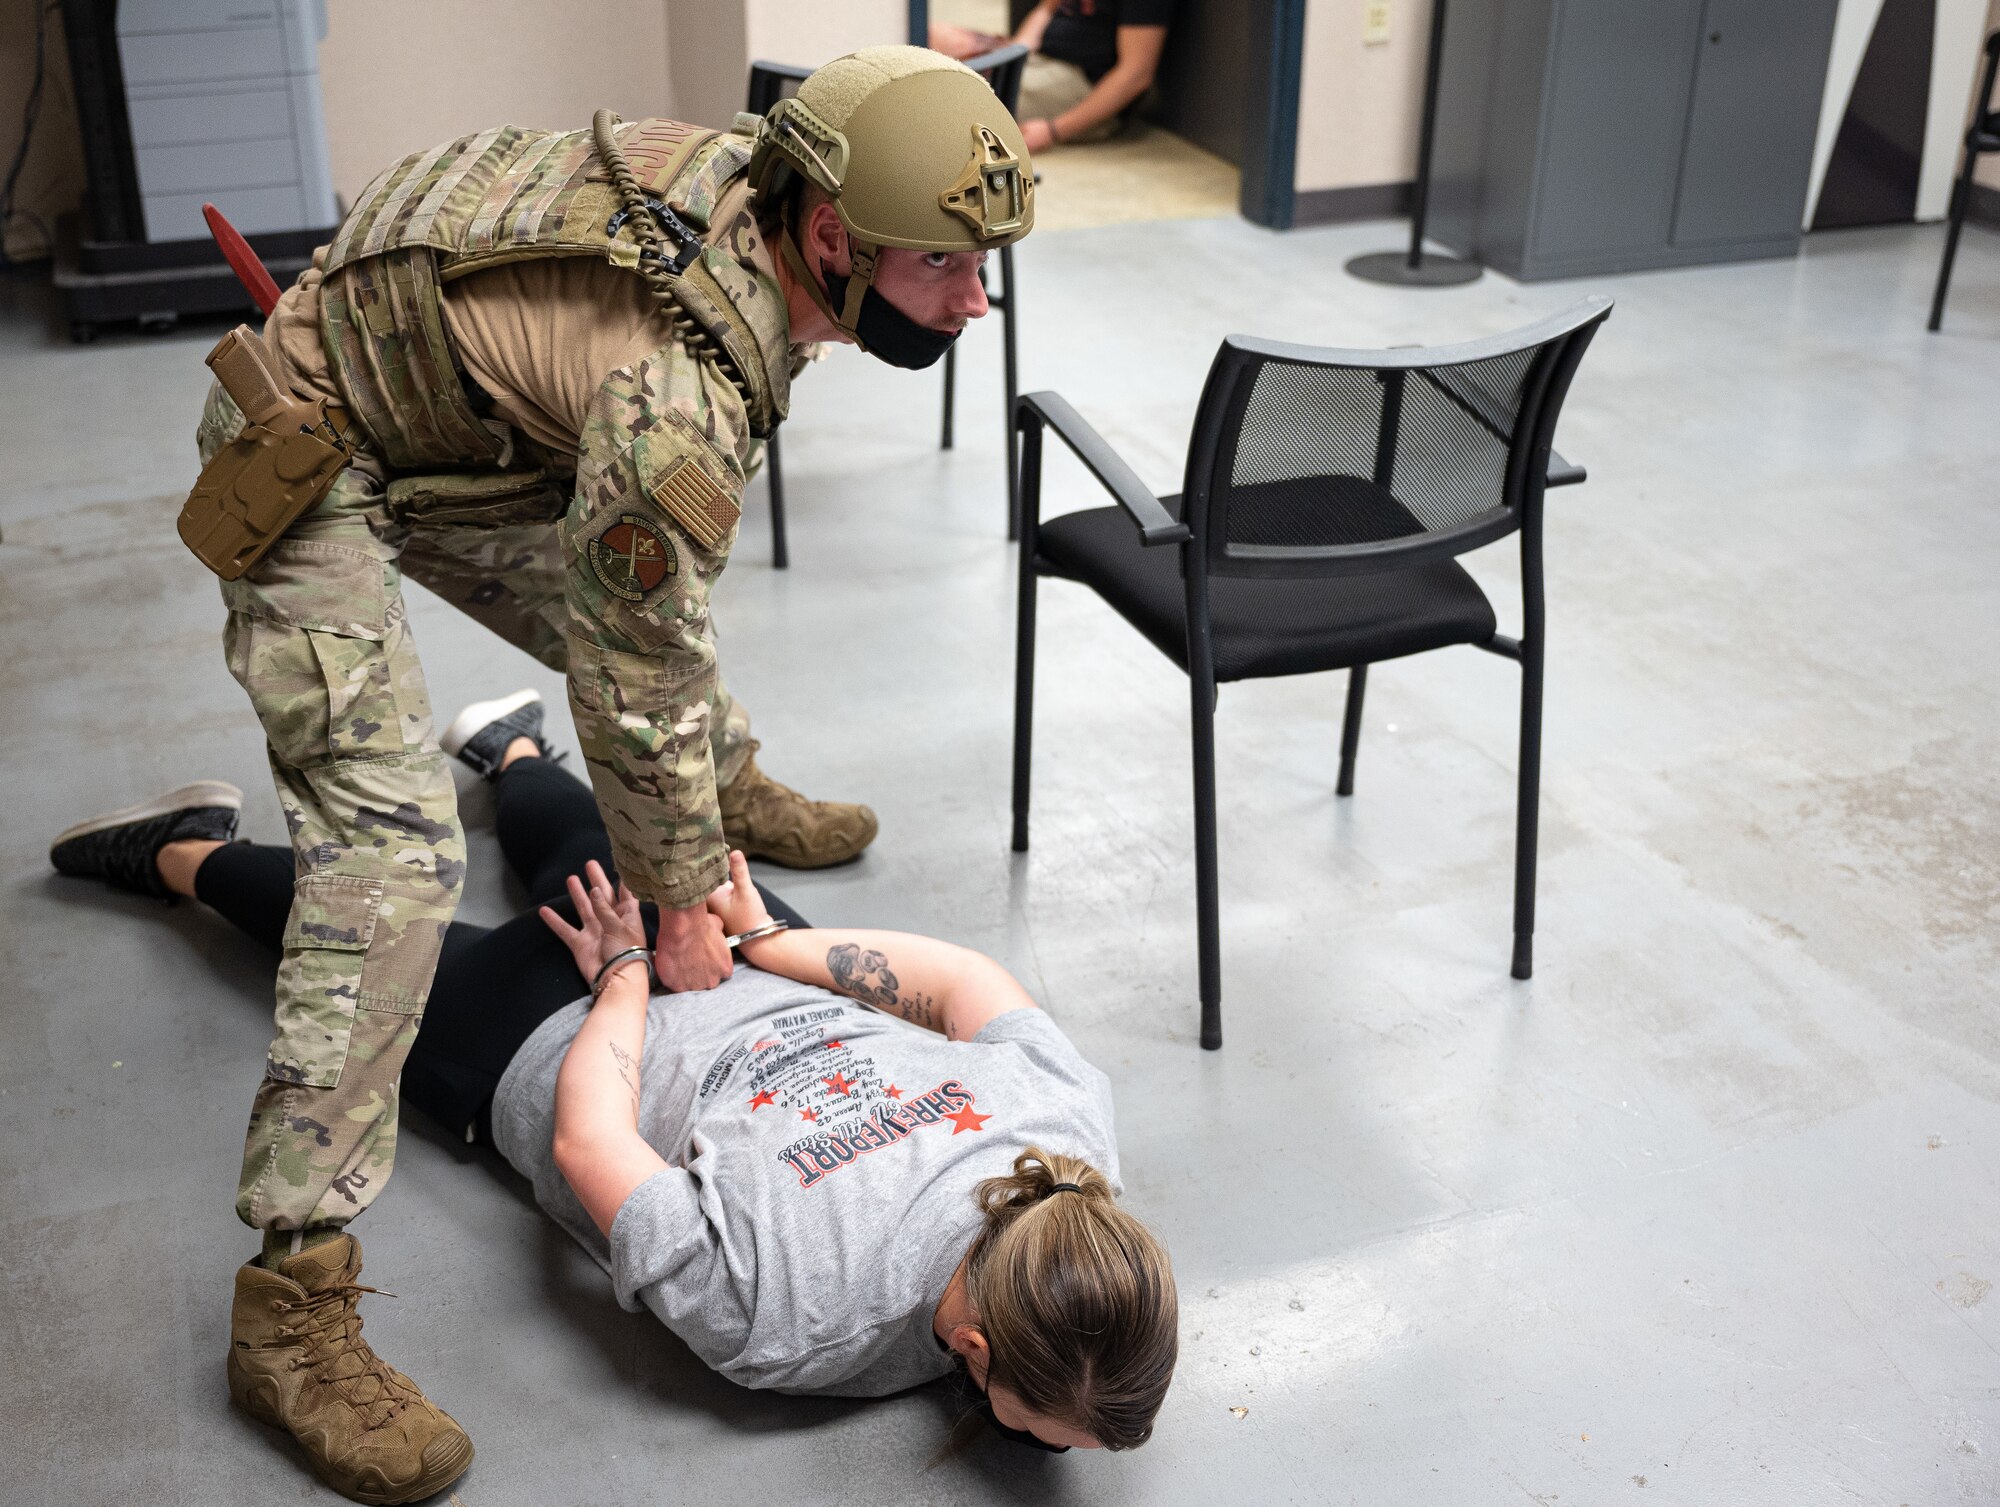 Senior Airman Zachary Burris, 2nd Security Forces Squadron installation patrolman, restrains a hostile actor during an active shooter exercise at Barksdale Air Force Base, Louisiana, Sept. 16, 2021. The exercise was designed to evaluate the training, readiness and capability of Barksdale’s first responders in order to effectively respond to active shooter threats to the installation. (U.S. Air Force photo by Airman 1st Class Jonathan E. Ramos)